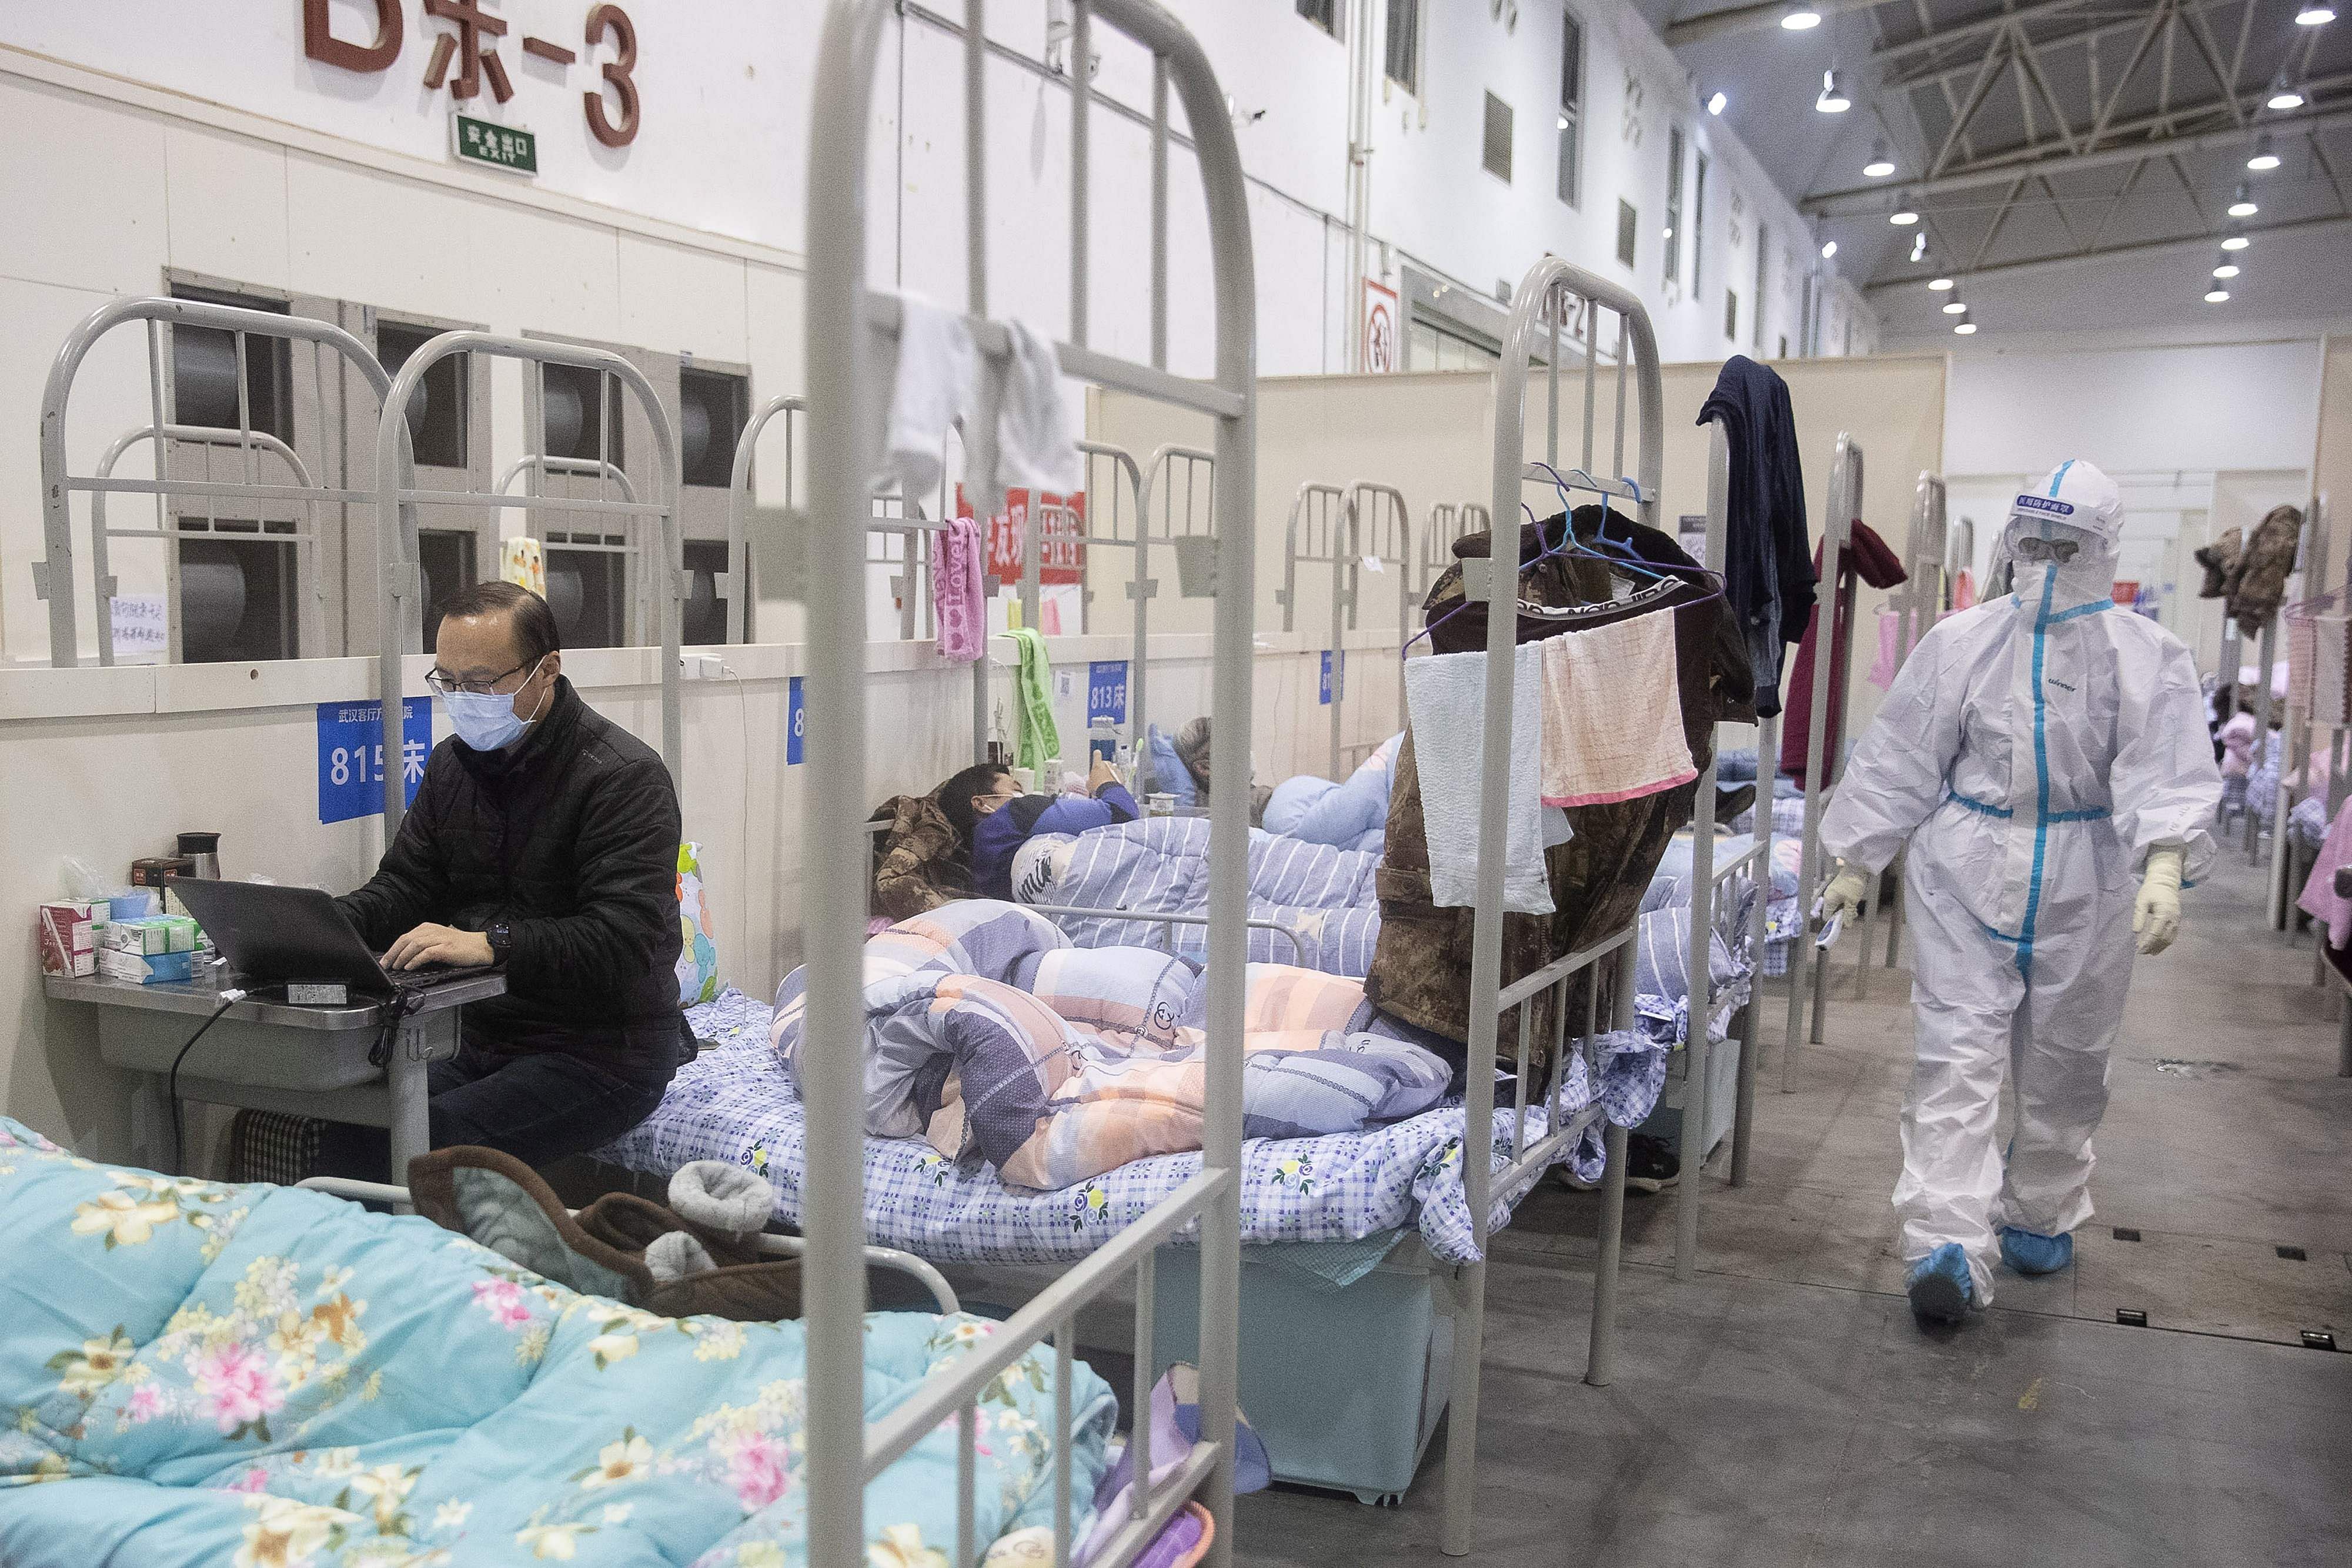 A man who has displayed mild symptoms of the COVID-19 coronavirus using a laptop at an exhibition centre converted into a hospital in Wuhan in China's central Hubei province. (Credit: AFP Photo)